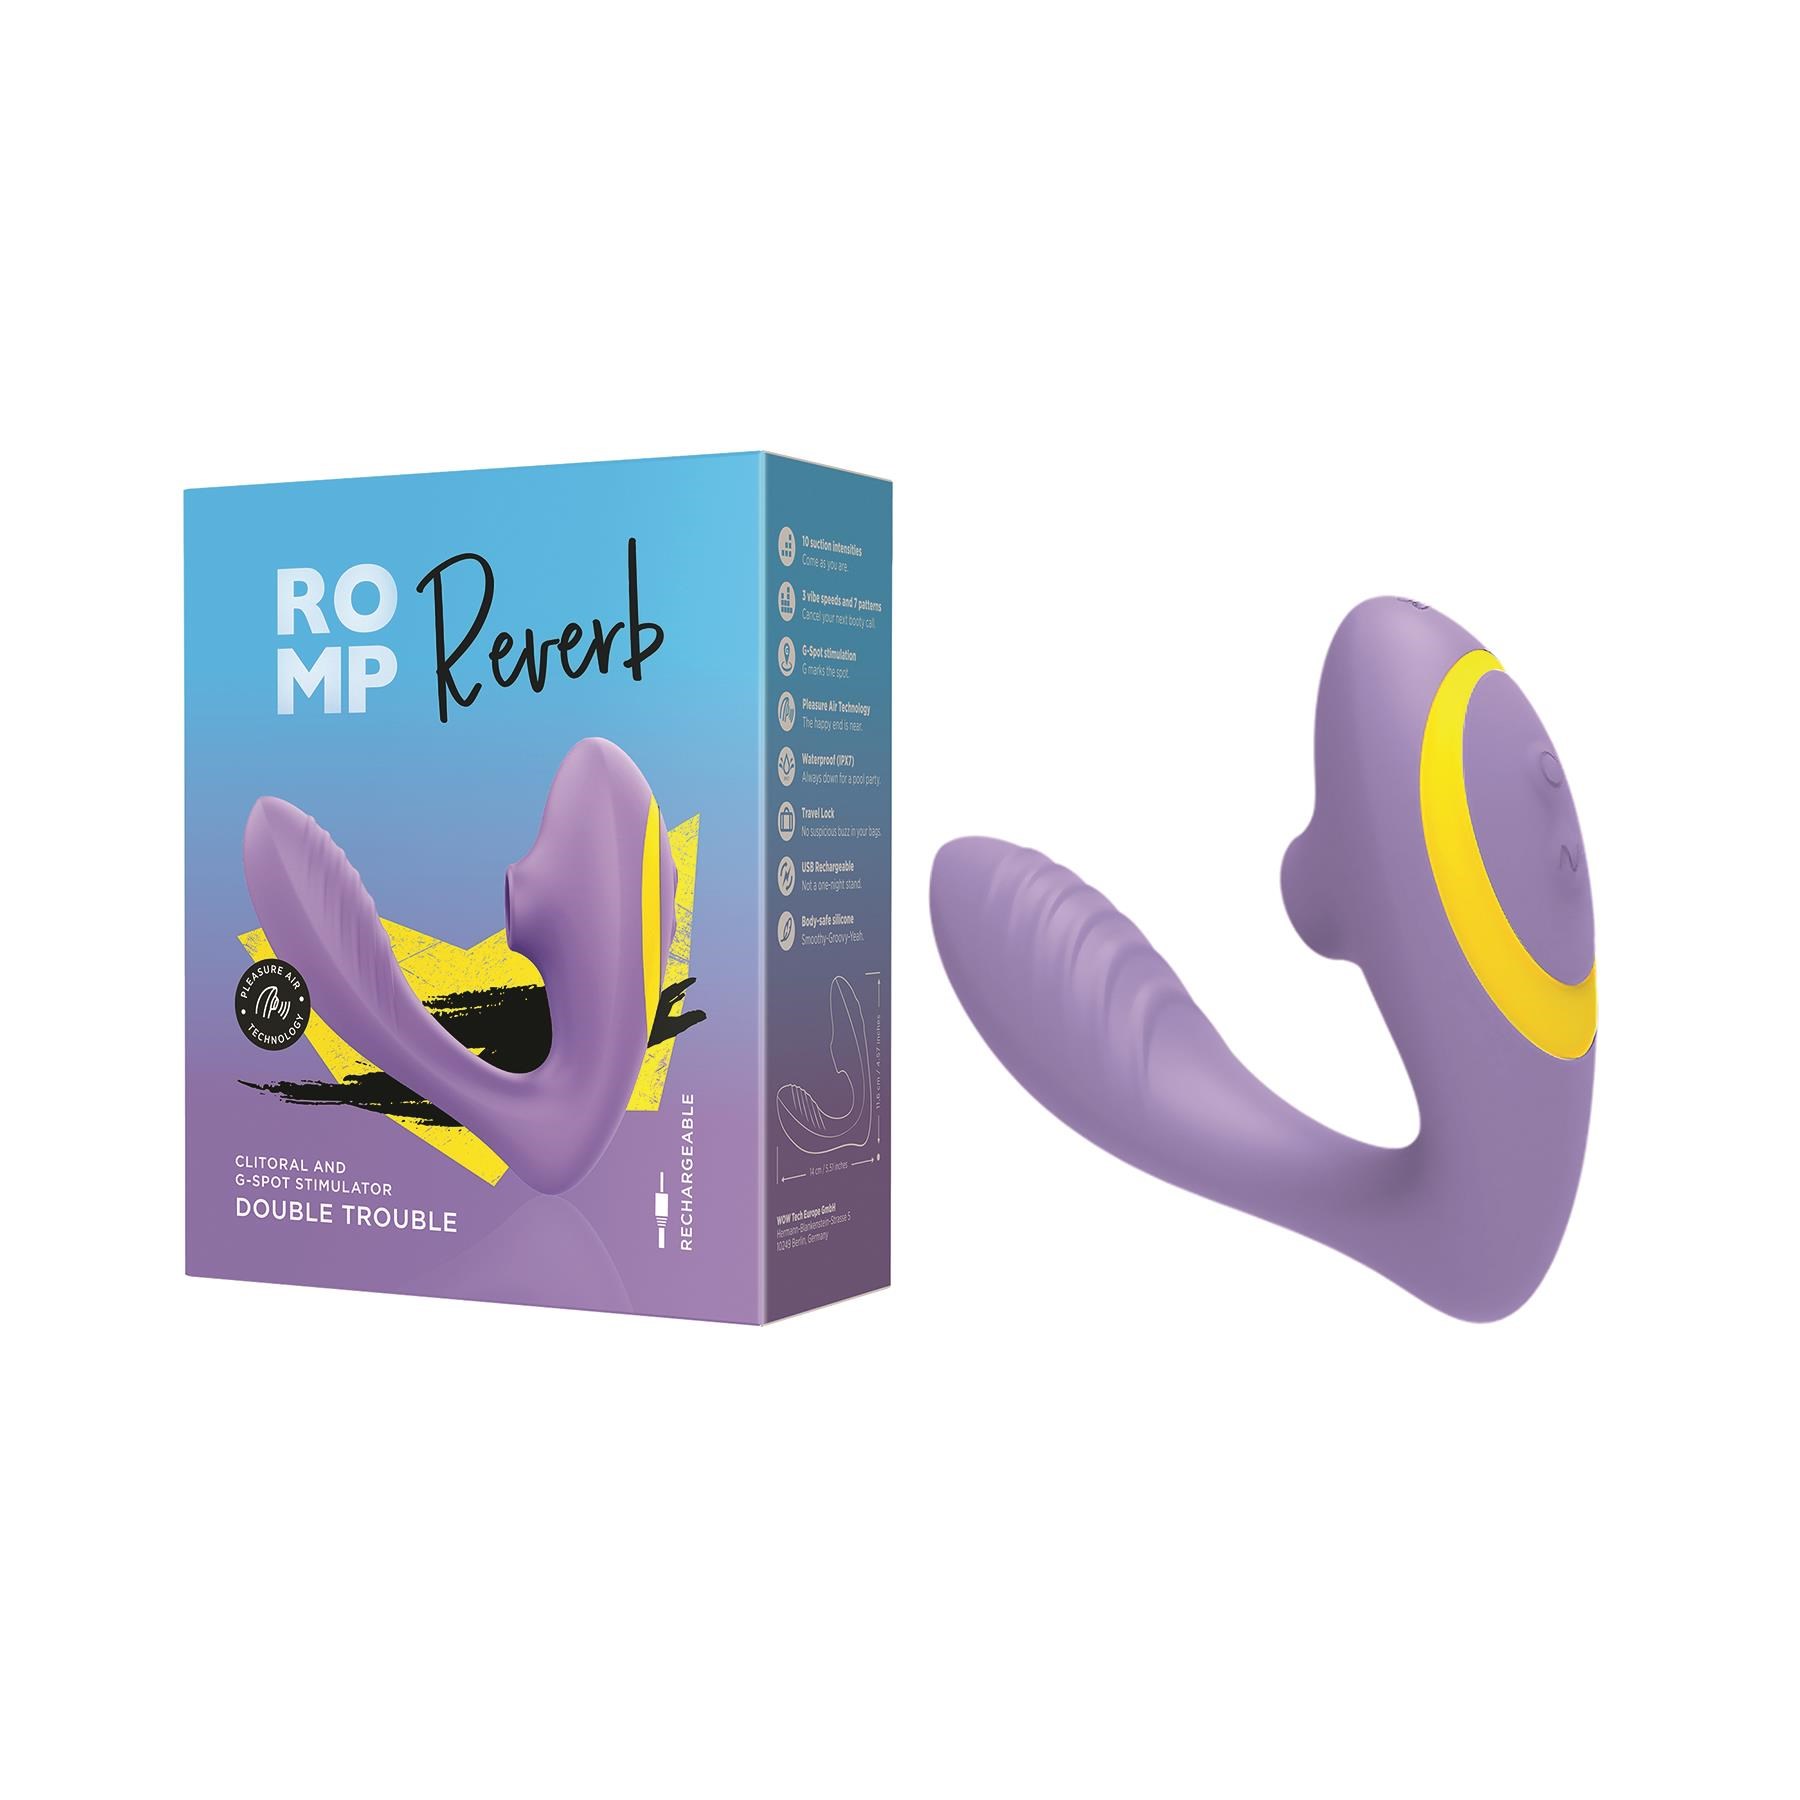 Romp Reverb G-Spot And Clitoral Suction Stimulator - Packaging